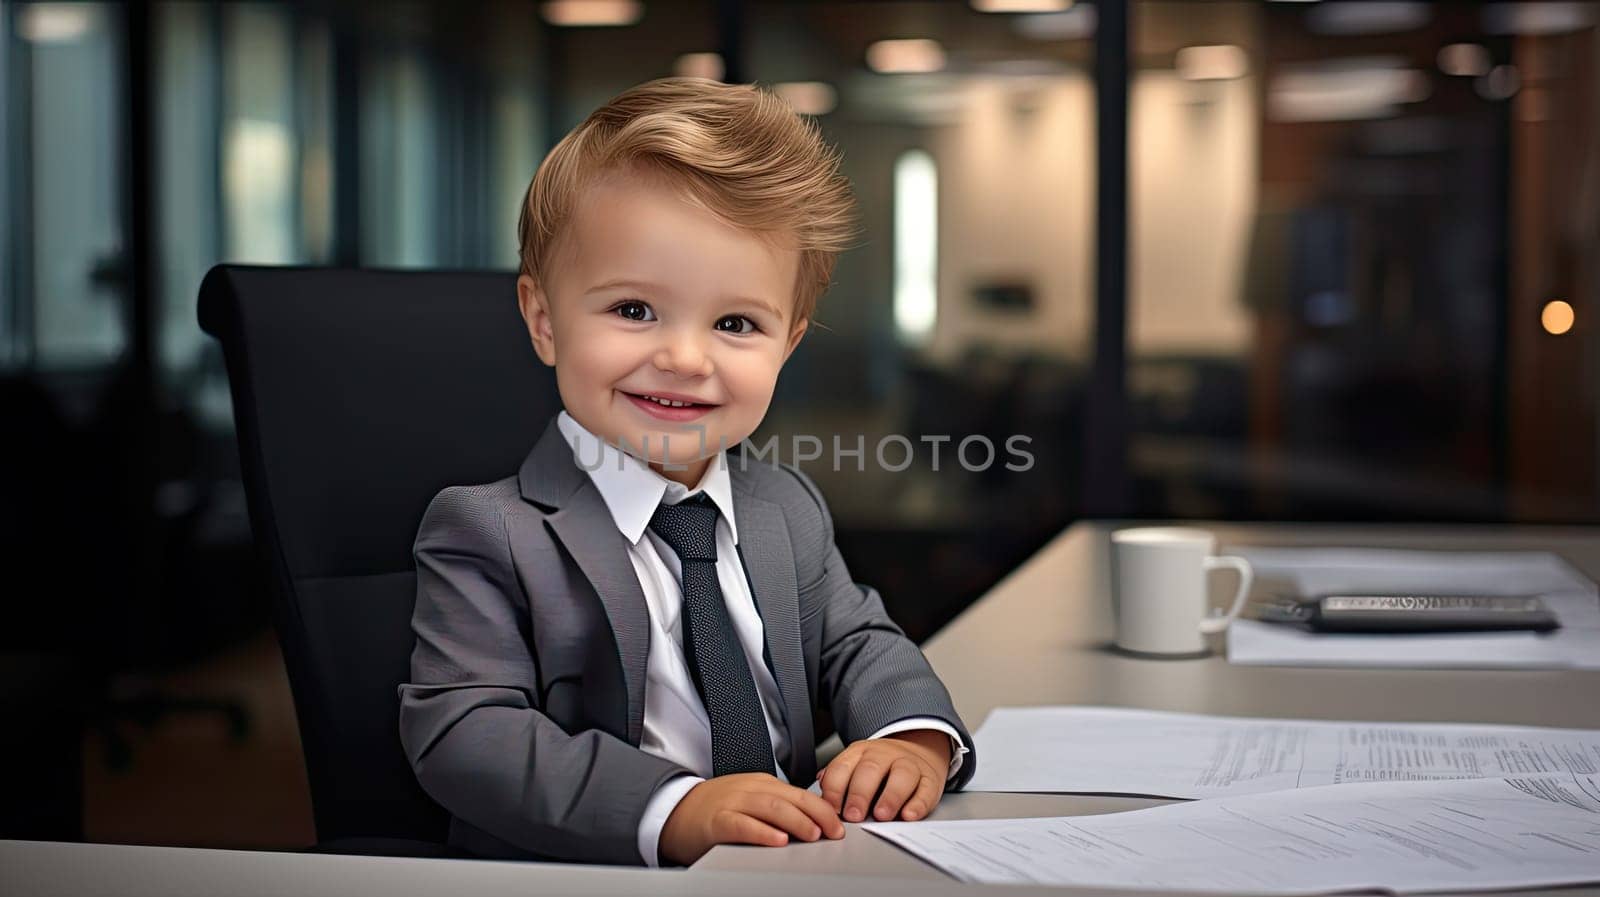 Cute business baby boy in suit working in the office joyfully smiling